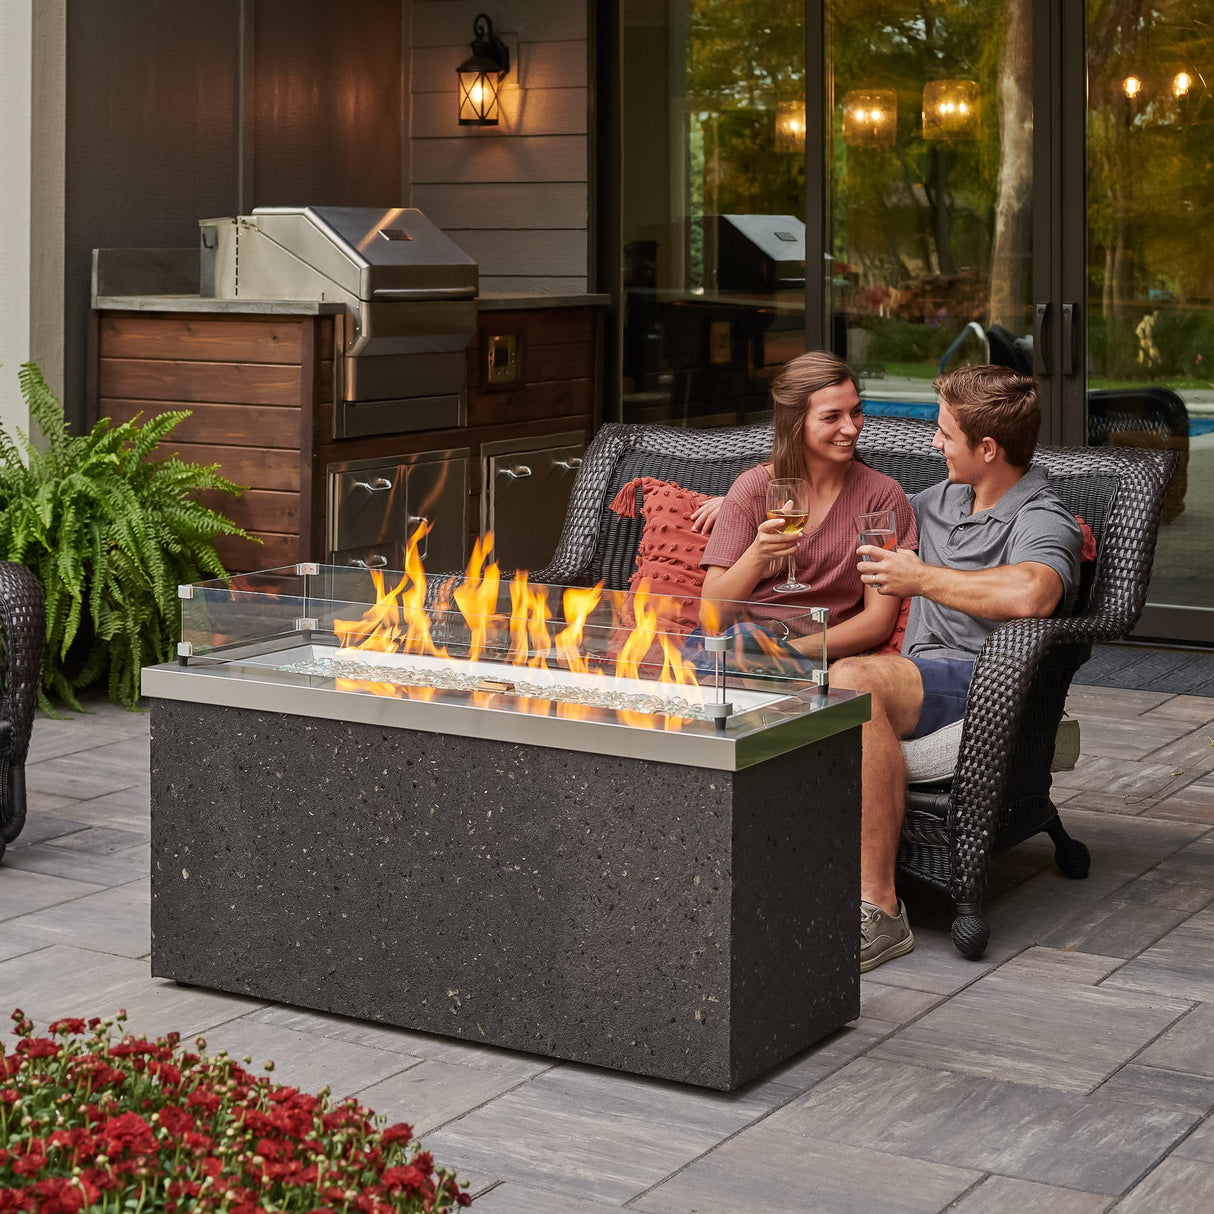 A couple sitting on a patio couch next to the Stainless Steel Key Largo Linear Gas Fire Pit Table